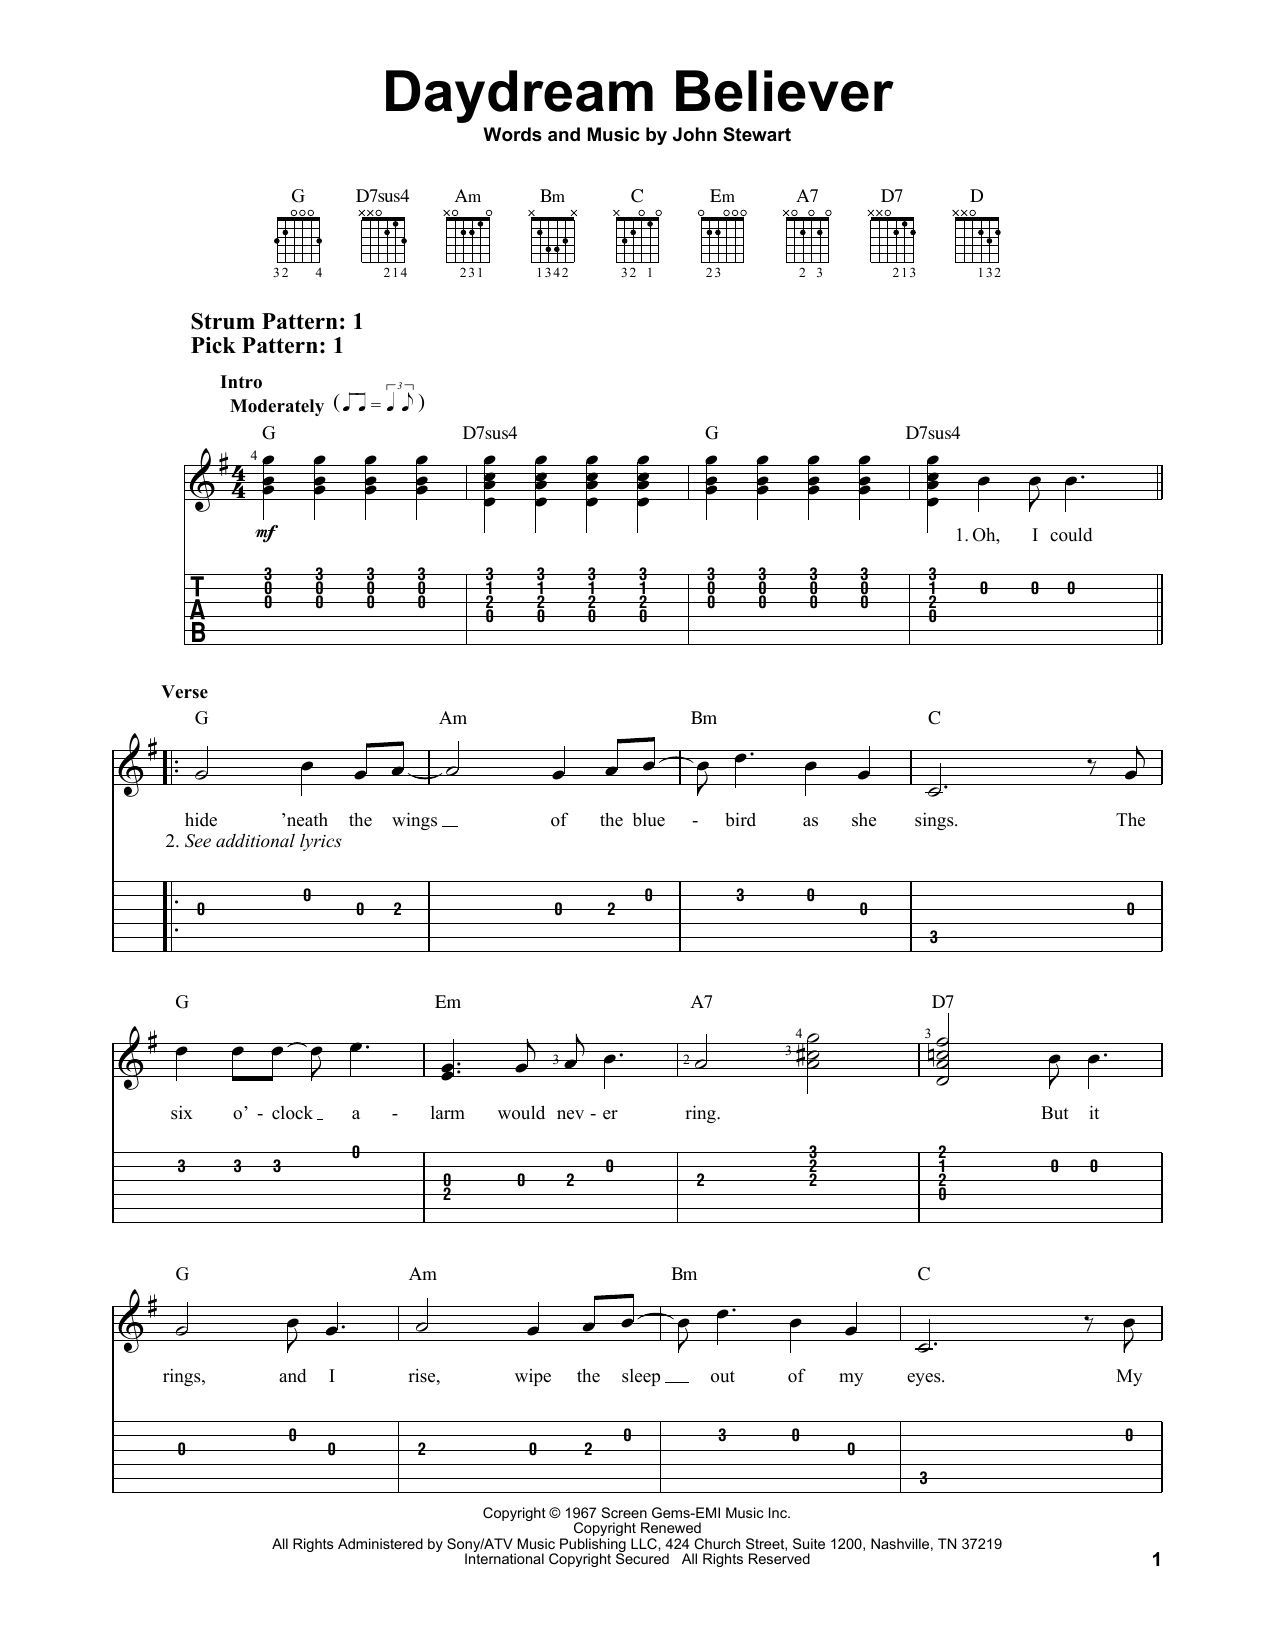 Download The Monkees Daydream Believer Sheet Music